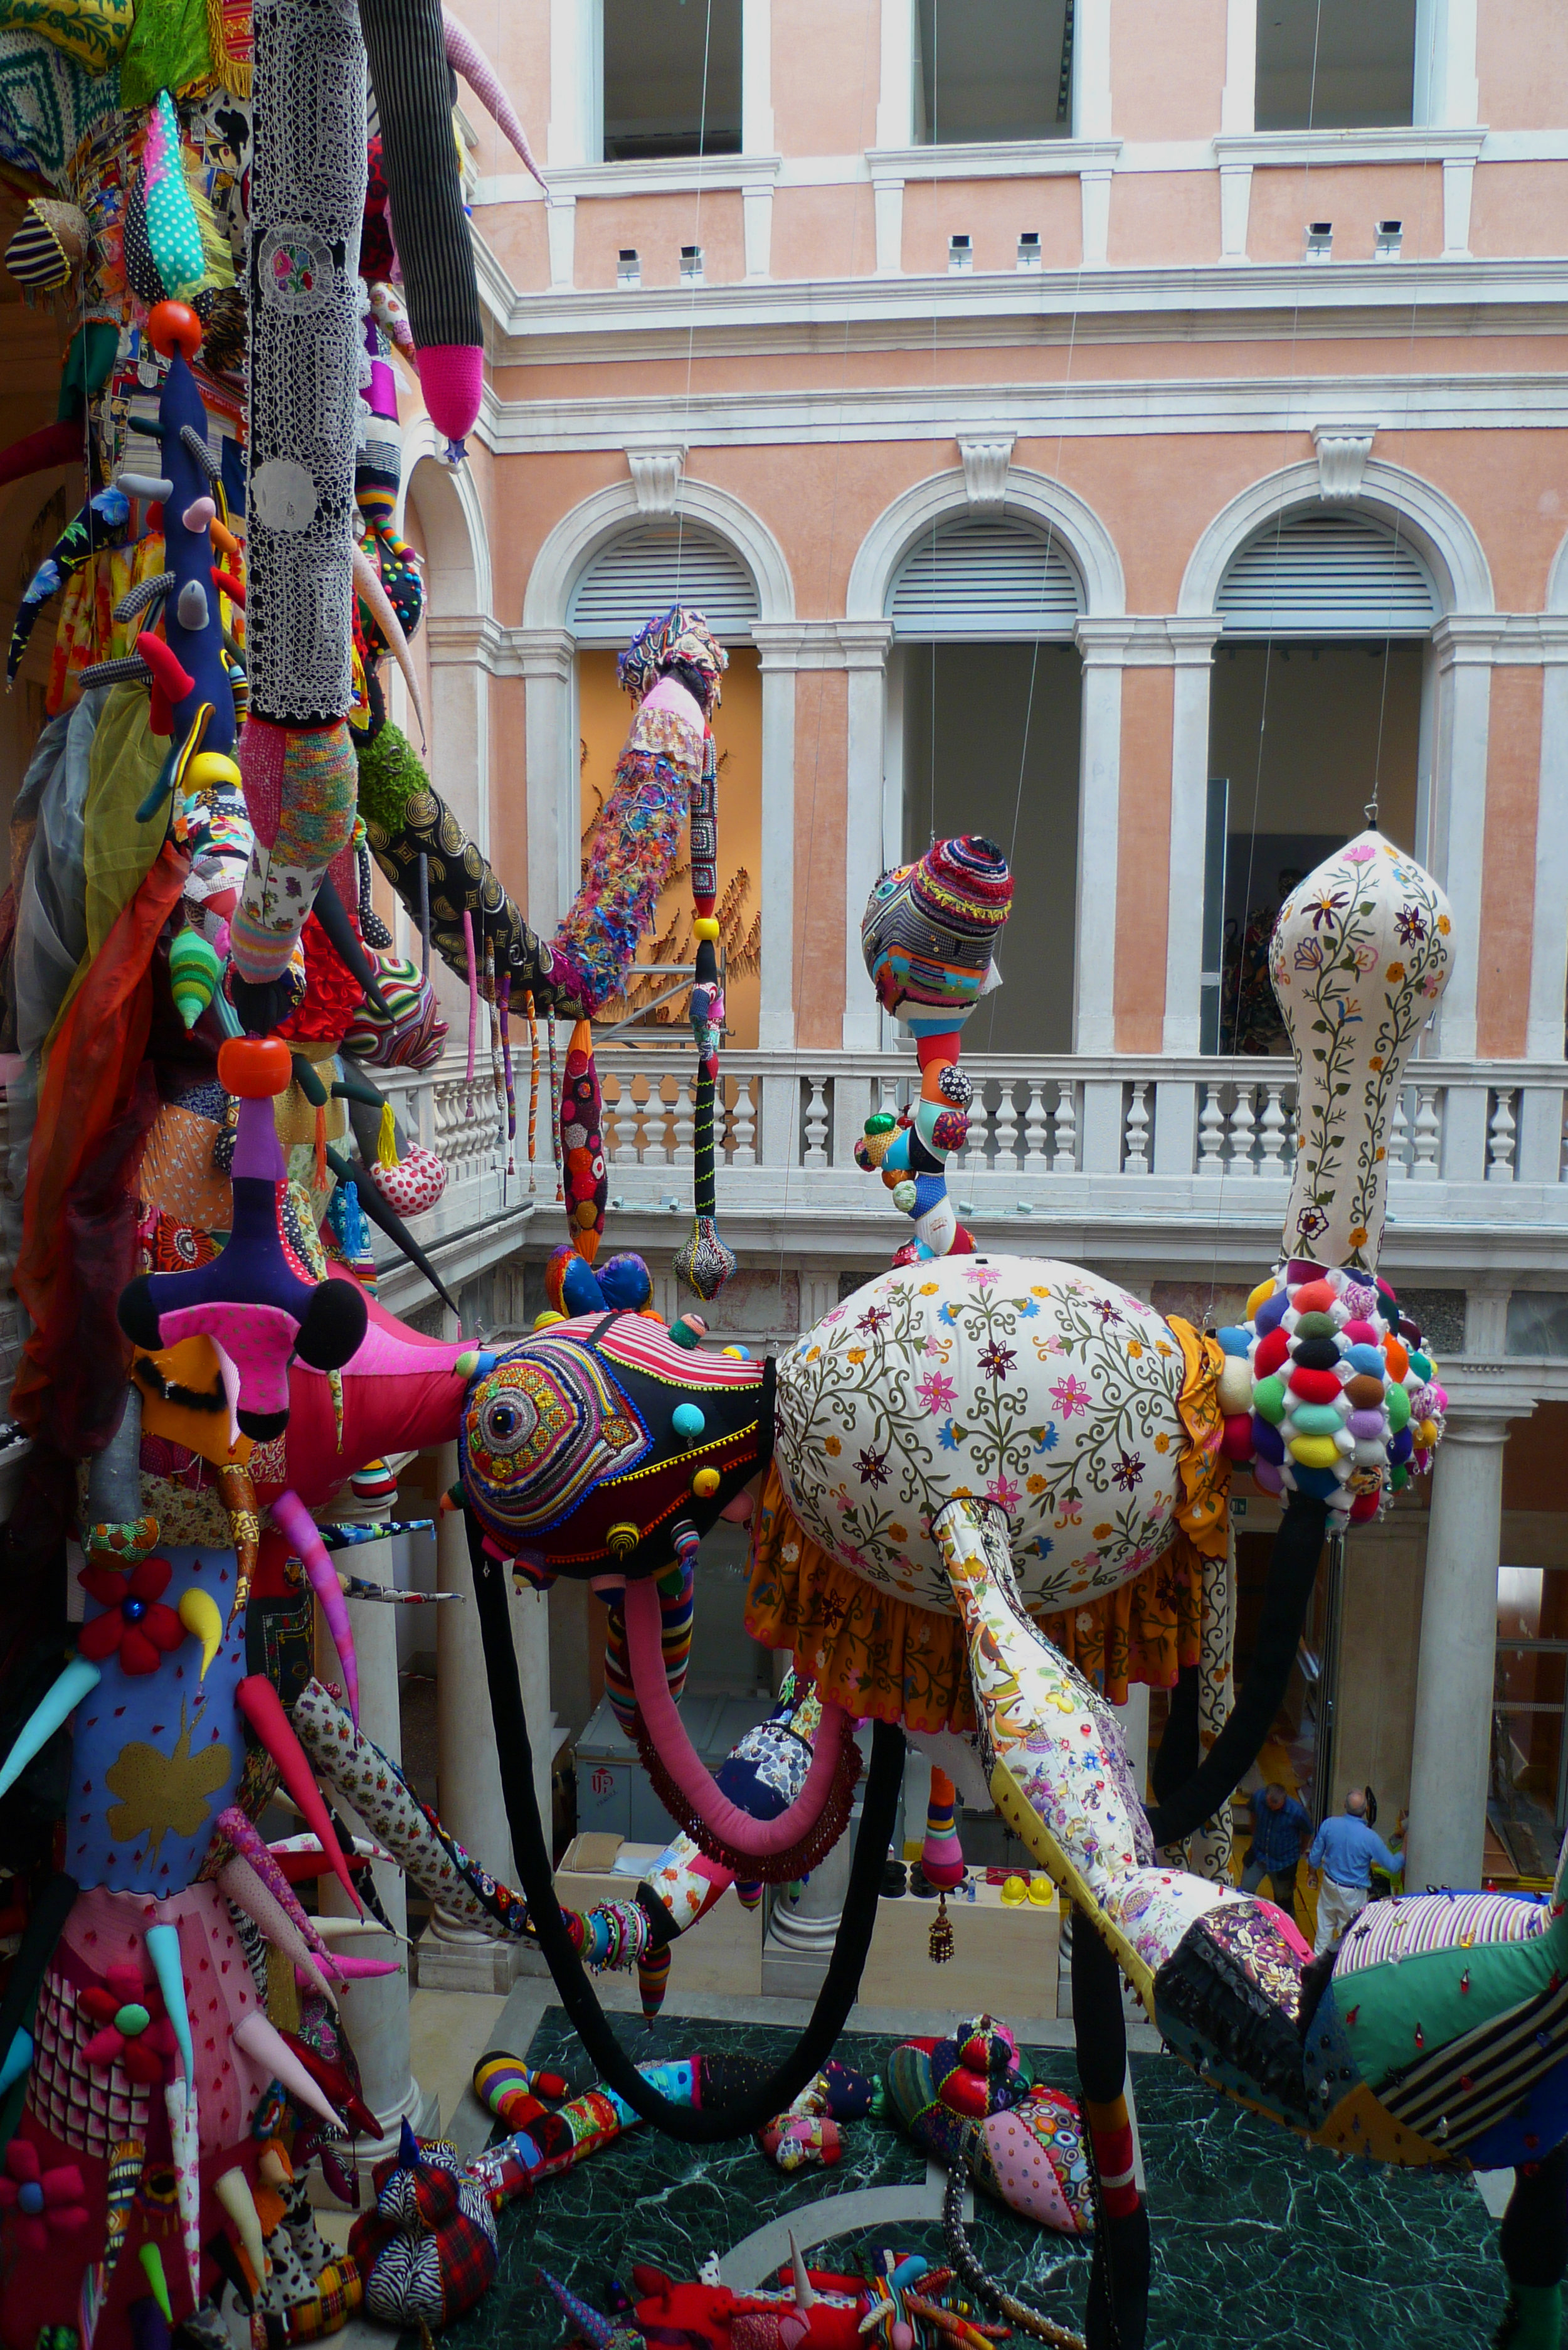   Contamination &nbsp;(2008-2010): Joana Vasconcelos at Palazzo Grassi in Venice, (François Pinault Foundation) where she created a mesh of sewn tentacles that spread throughout the palazzo’s various levels.  